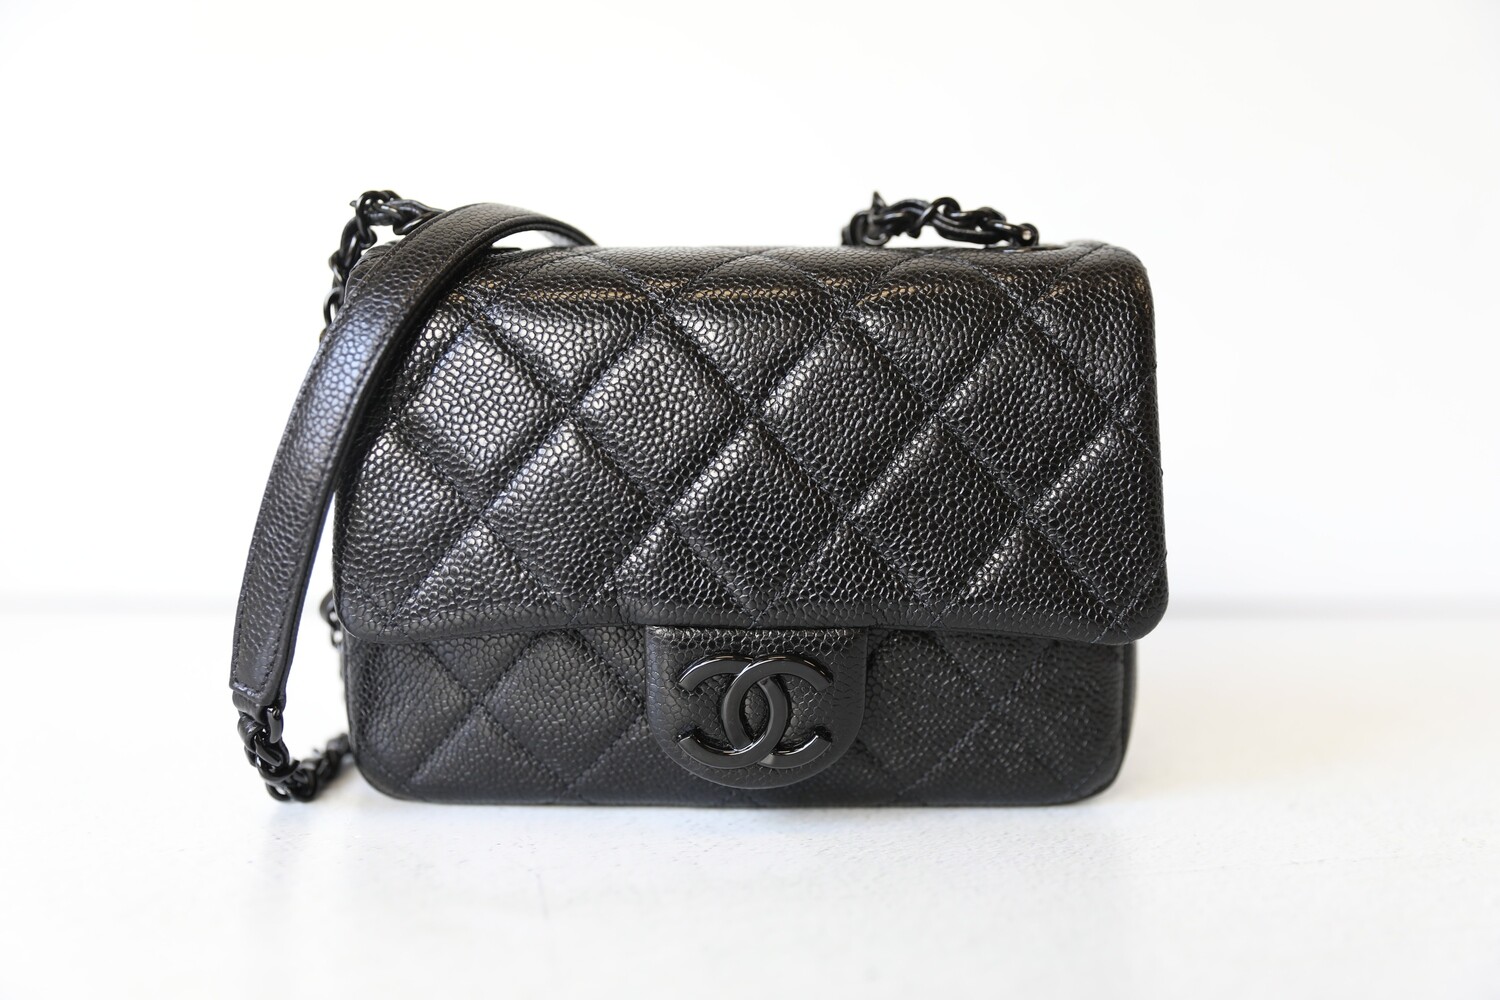 Chanel Incognito Mini Square Flap Black Quilted Caviar with shiny